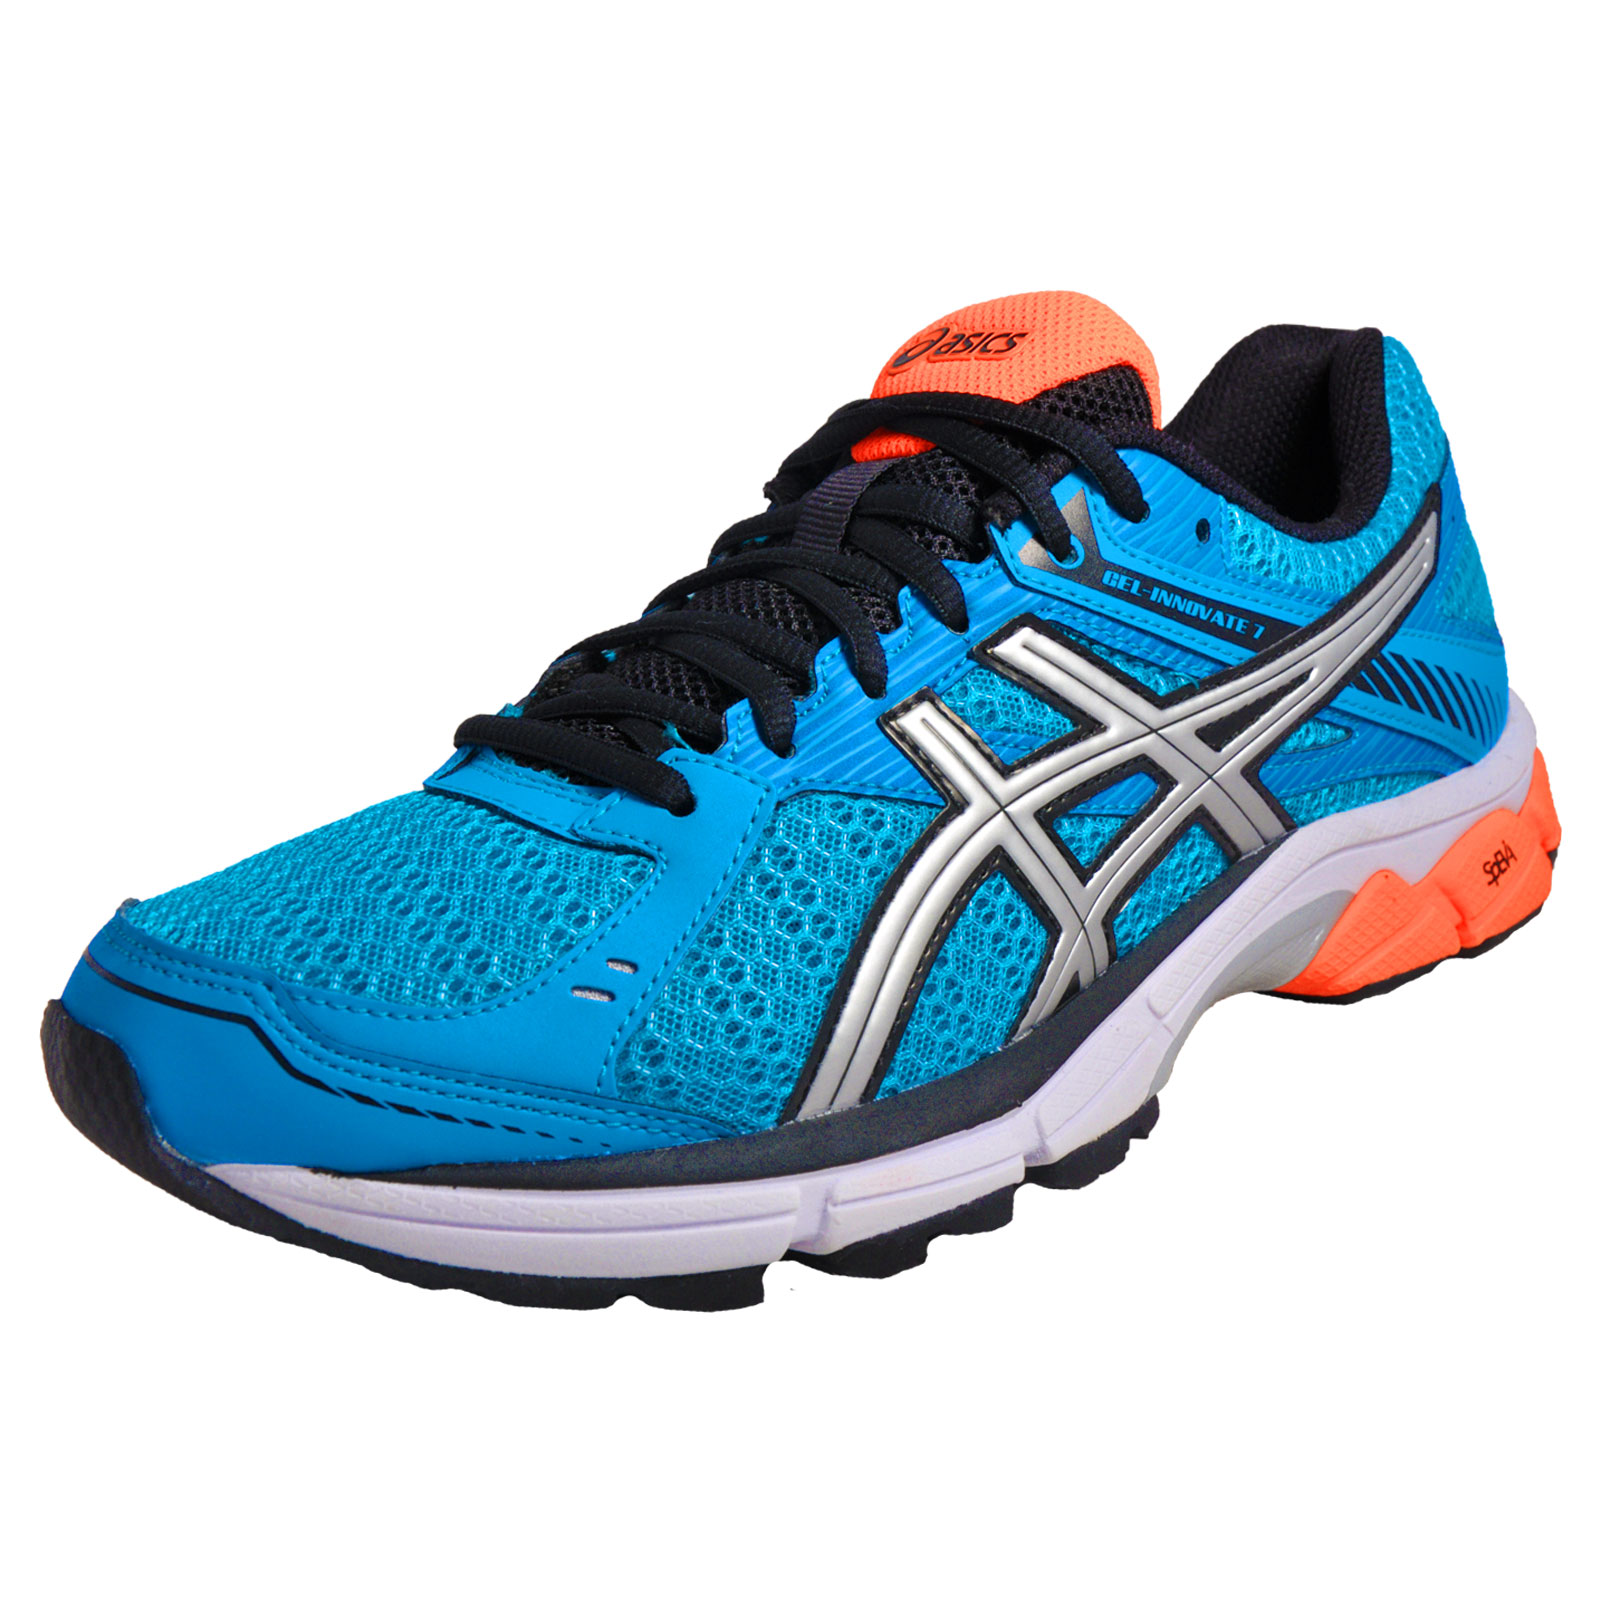 Asics Gel-Innovate 7 Mens Running Shoes Fitness Gym Trainers Island ...